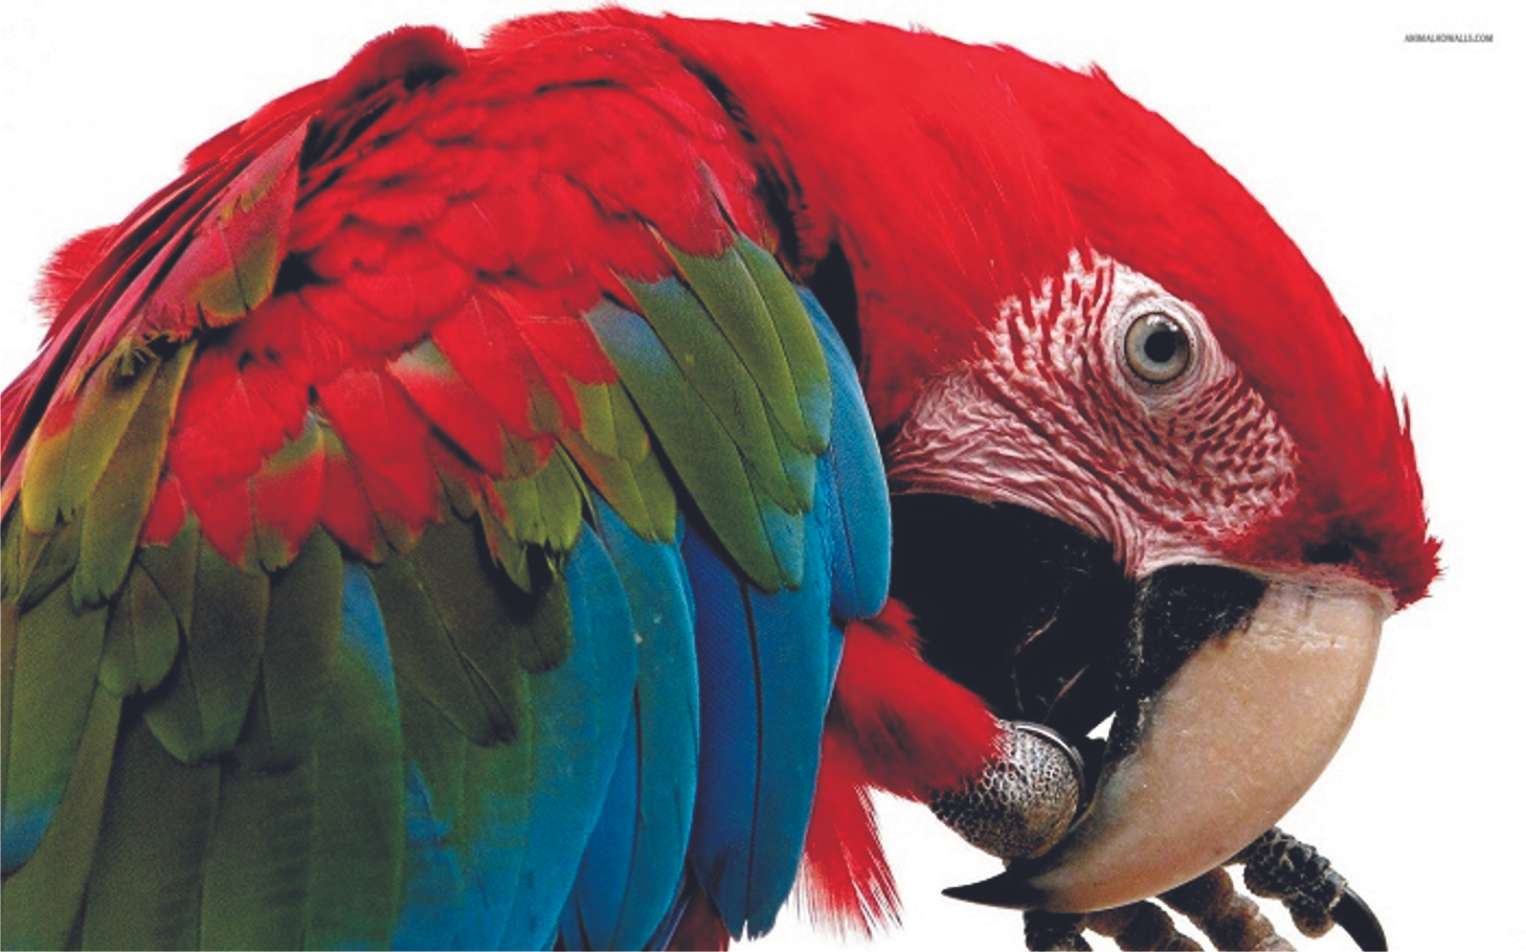 colorful-critter-scarlet-macaw puzzle online